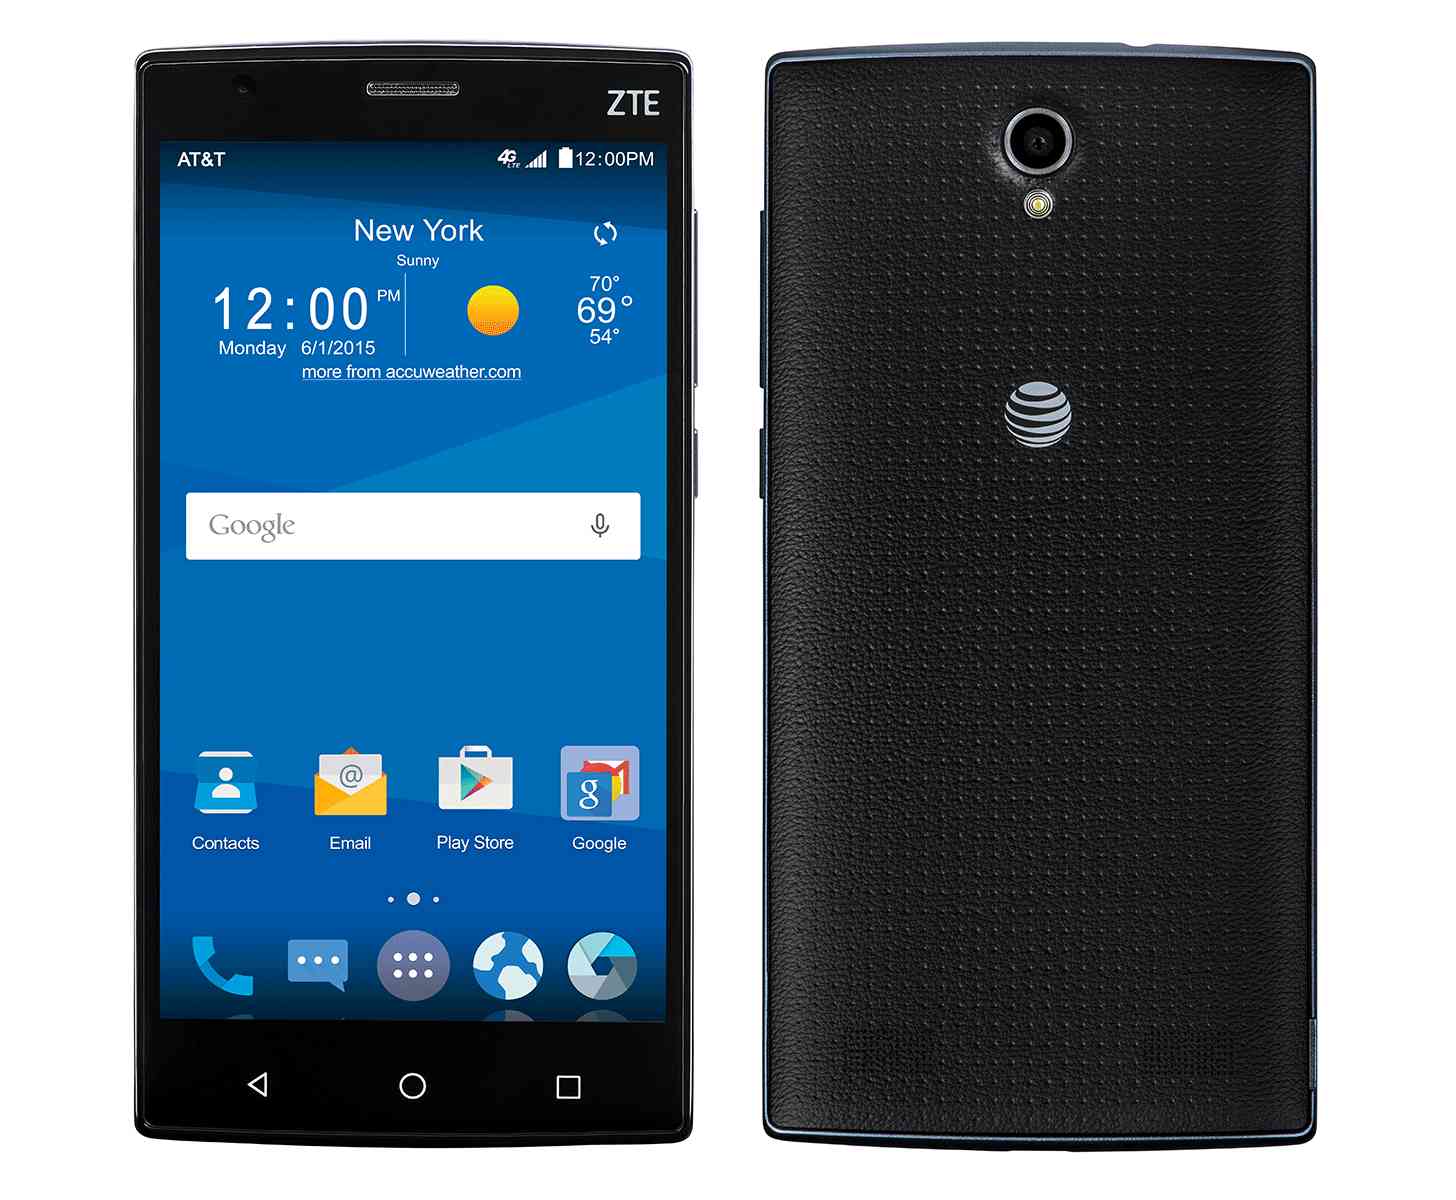 ZTE ZMAX 2 AT&T official